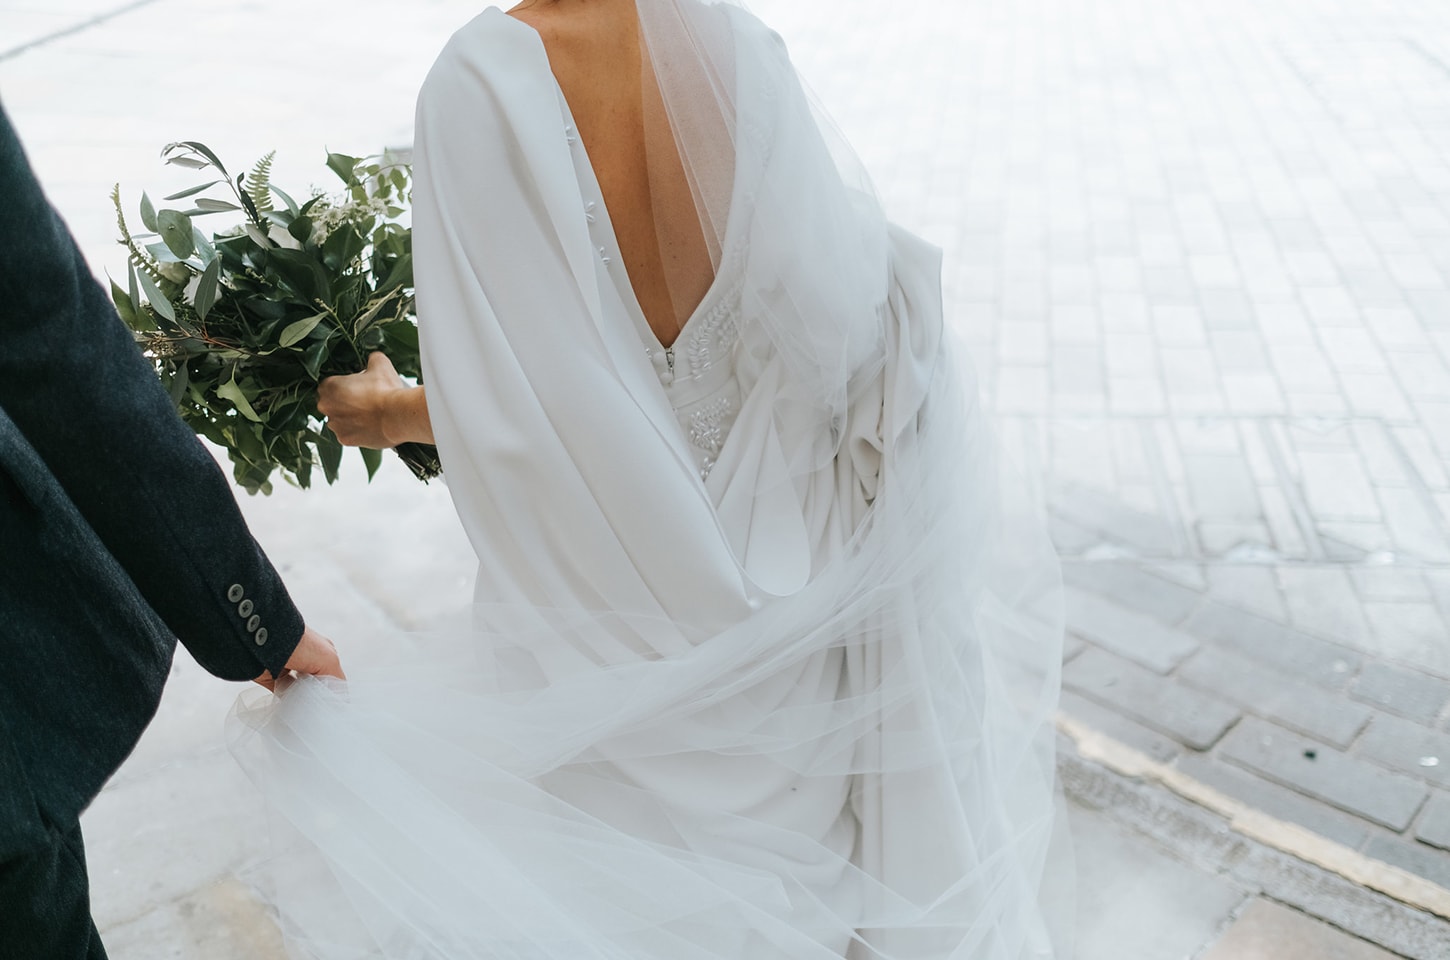 Post Mastectomy Wedding Dress Shopping - To Work Or PlayTo Work Or Play  A  blog of two halves: Lifestyle guidance for city-savvy socialites, and  insight, inspiration and opinion for ad-curious folk.